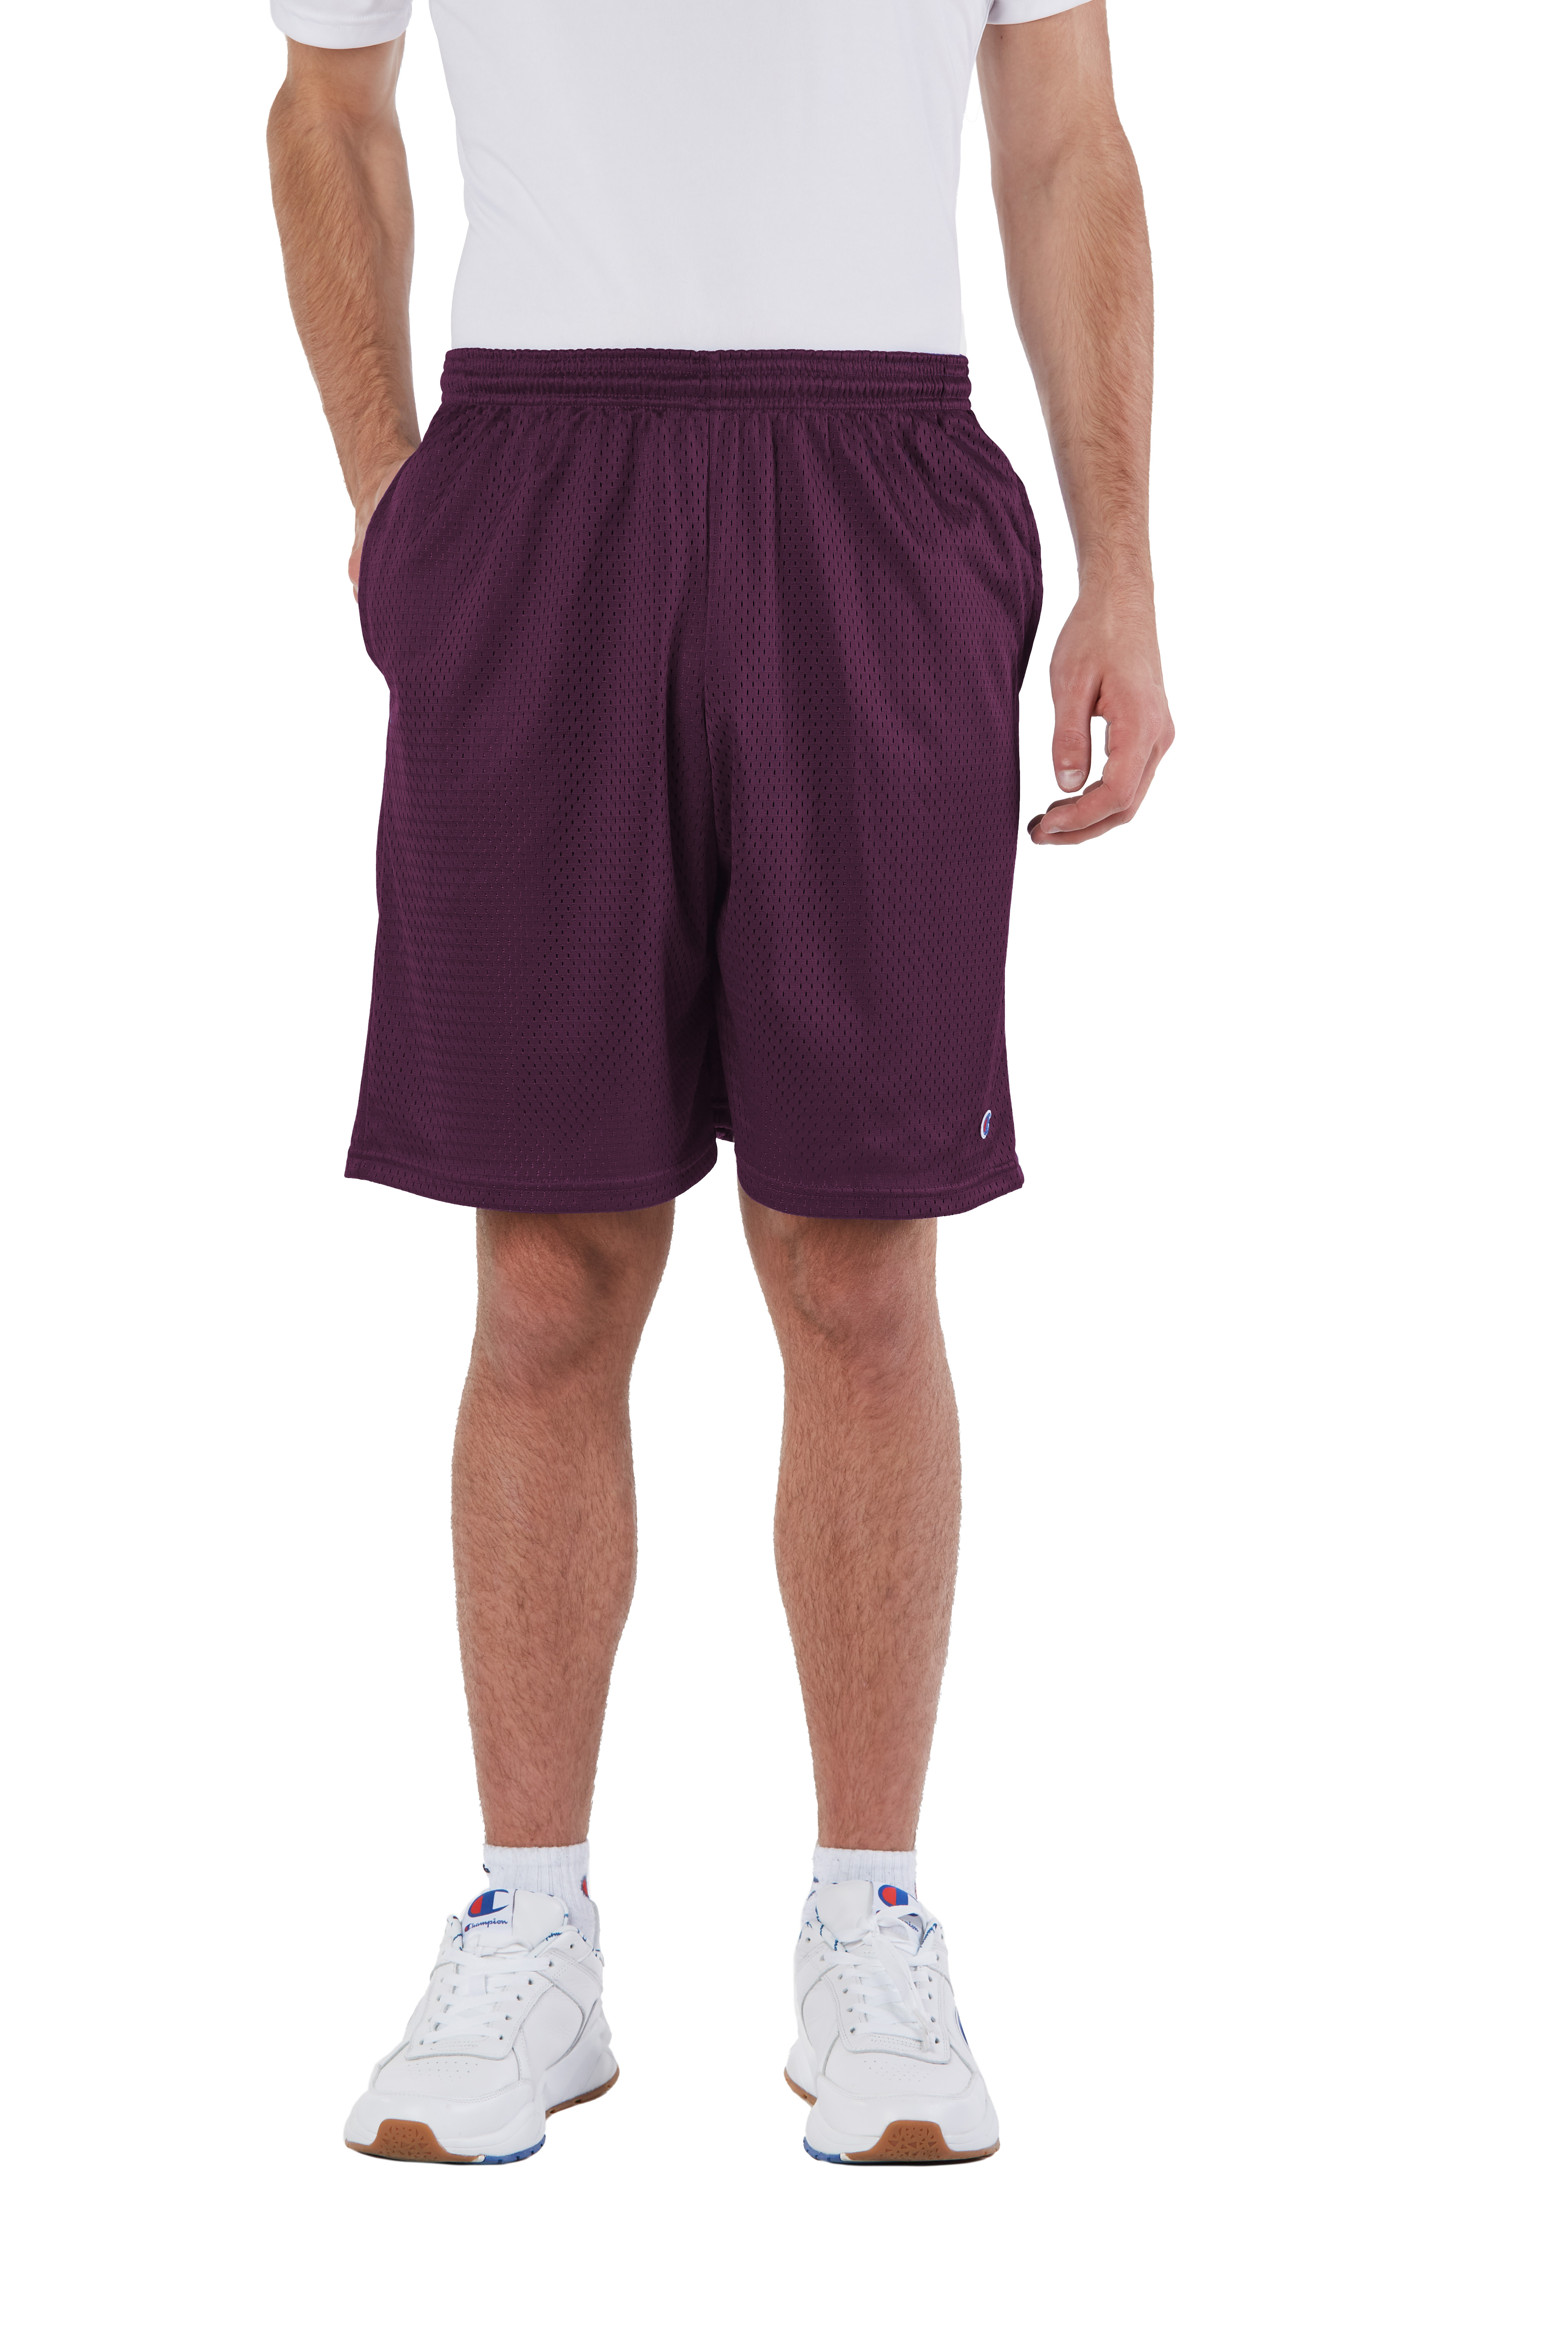 Adult 3.7 oz. Mesh Short with Pockets